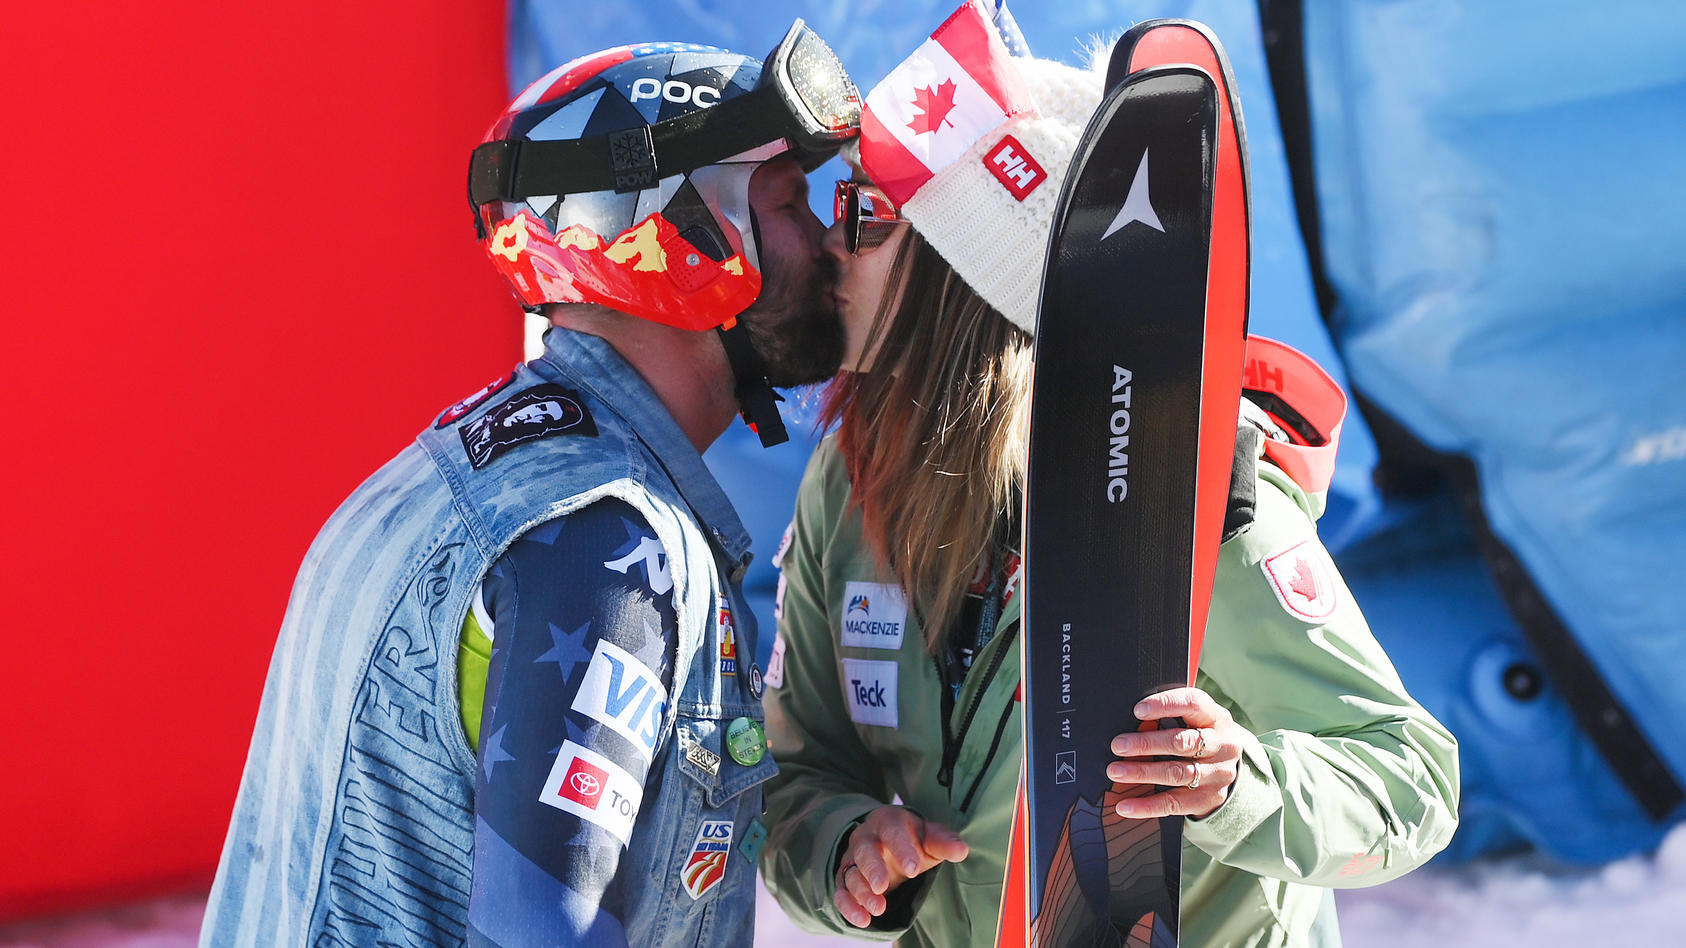 ANDORRA LA VELLA, ANDORRA - MARCH 15: Travis Ganong of the United States celebrates with his partner Marie-Michele Gagnon after competing in the Men's Downhill ahead of his retirement during the Audi FIS Alpine Ski World Cup Finals on March 15, 2023 